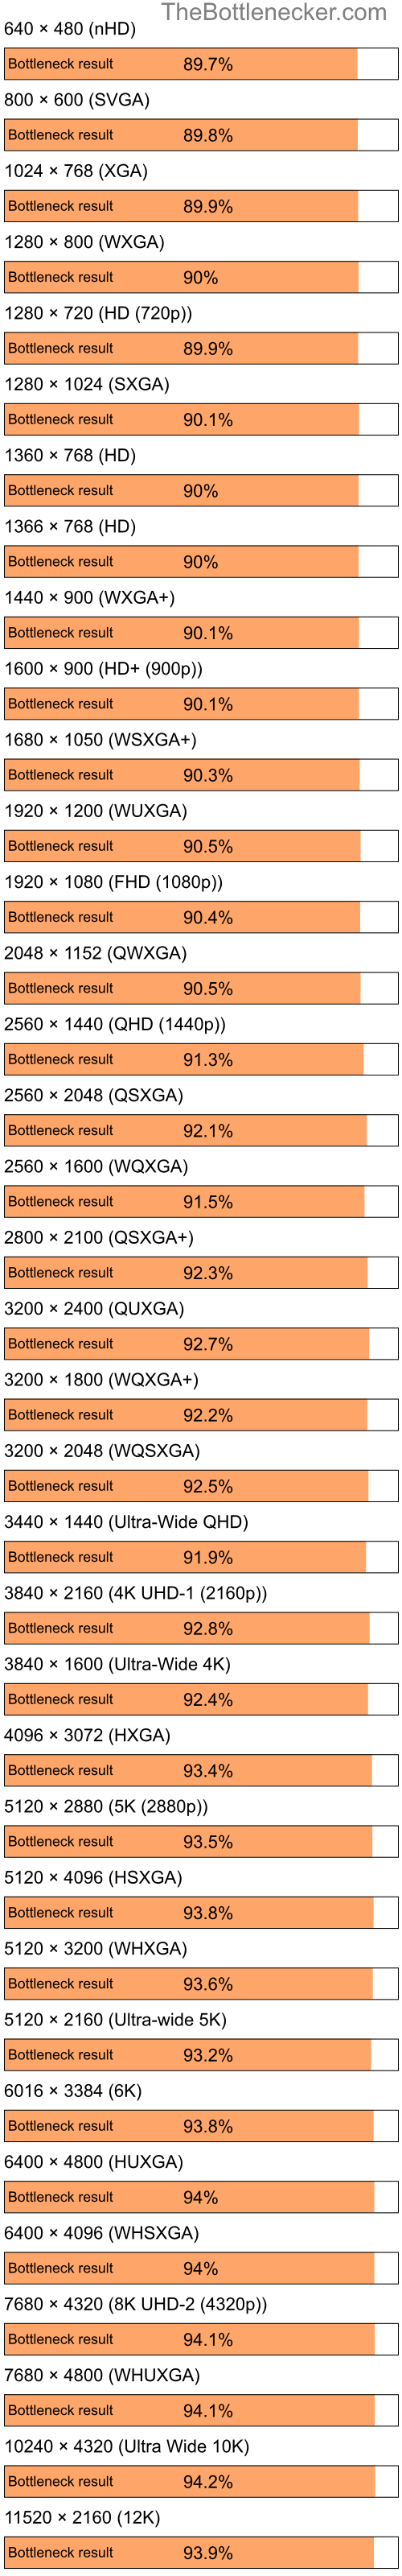 Bottleneck results by resolution for Intel Celeron and NVIDIA GeForce FX 5500 in Graphic Card Intense Tasks